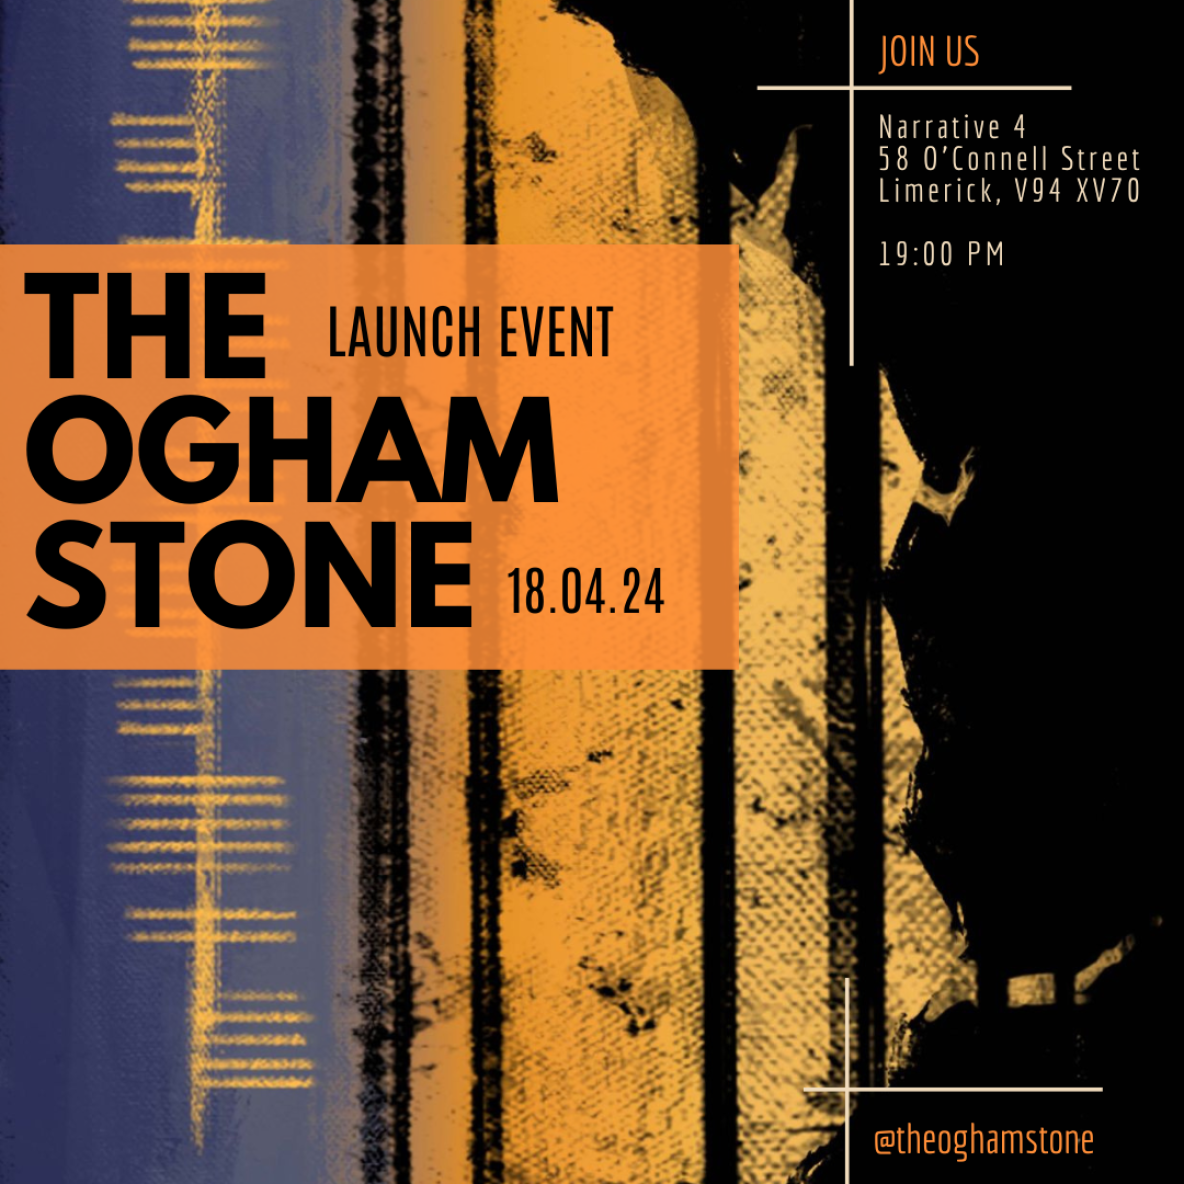 The Ogham Stone